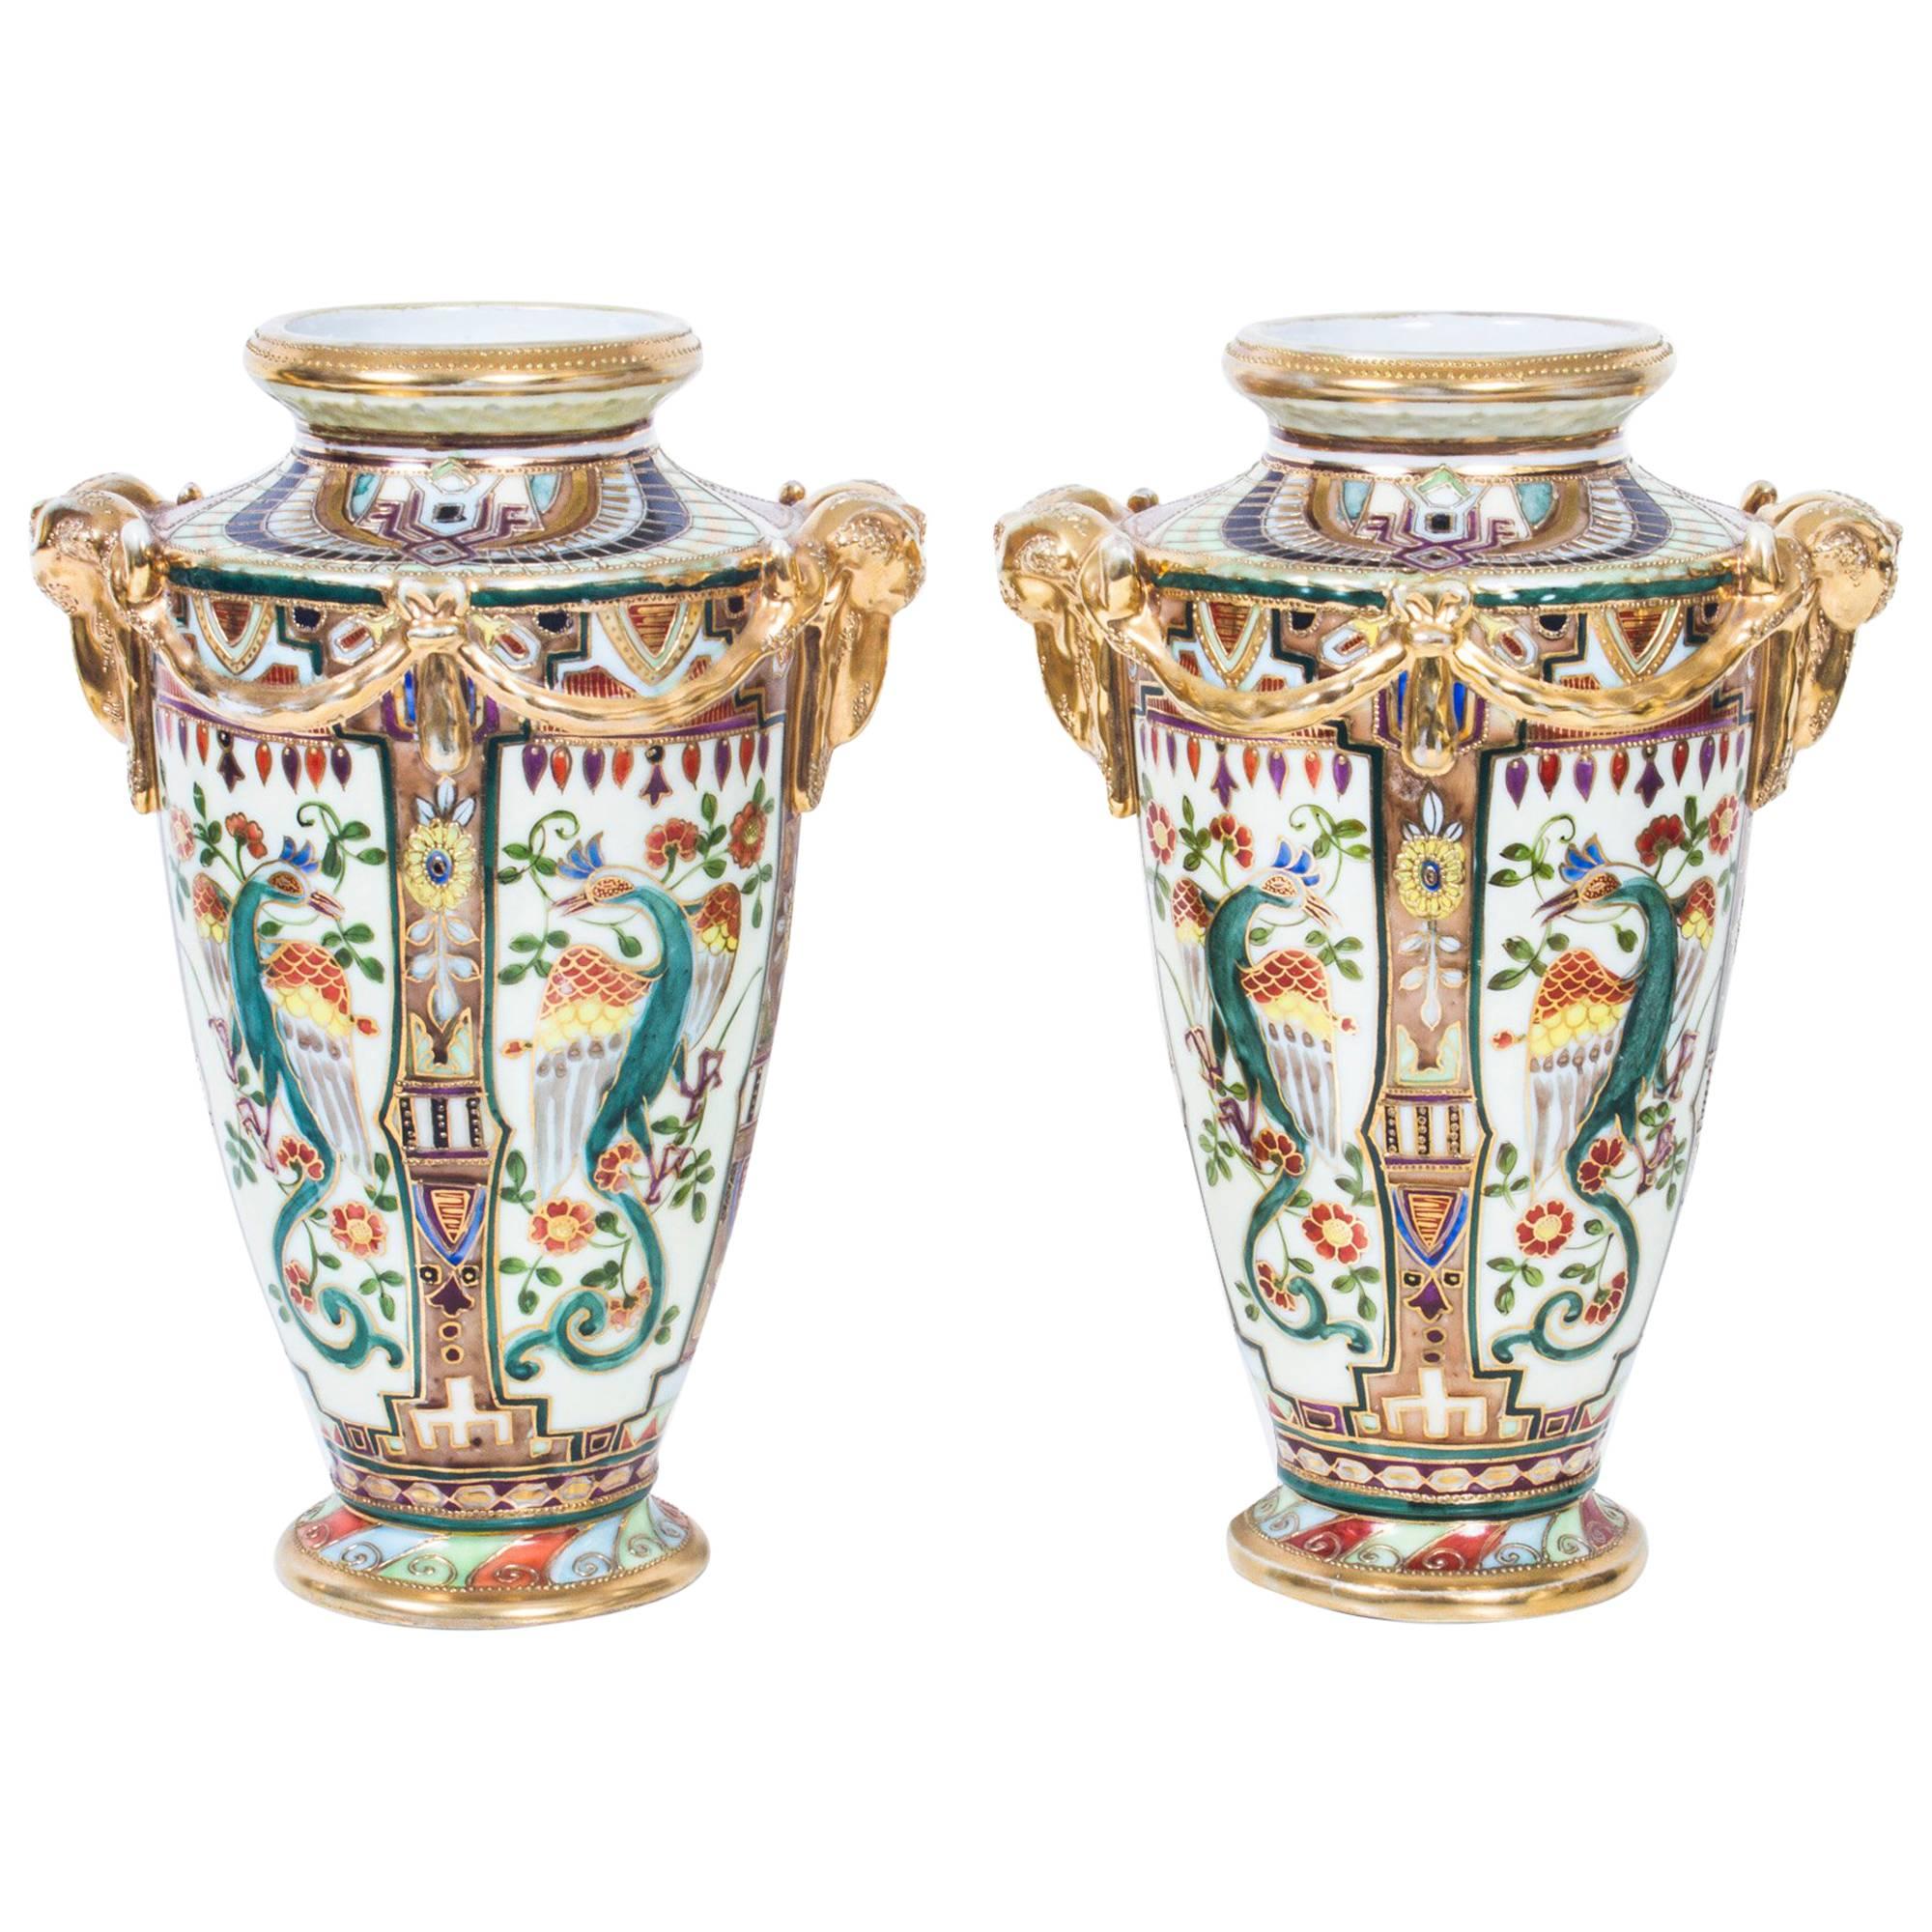 Early 20th Century Vintage Pair of Noritake Hand-Painted Porcelain Vases